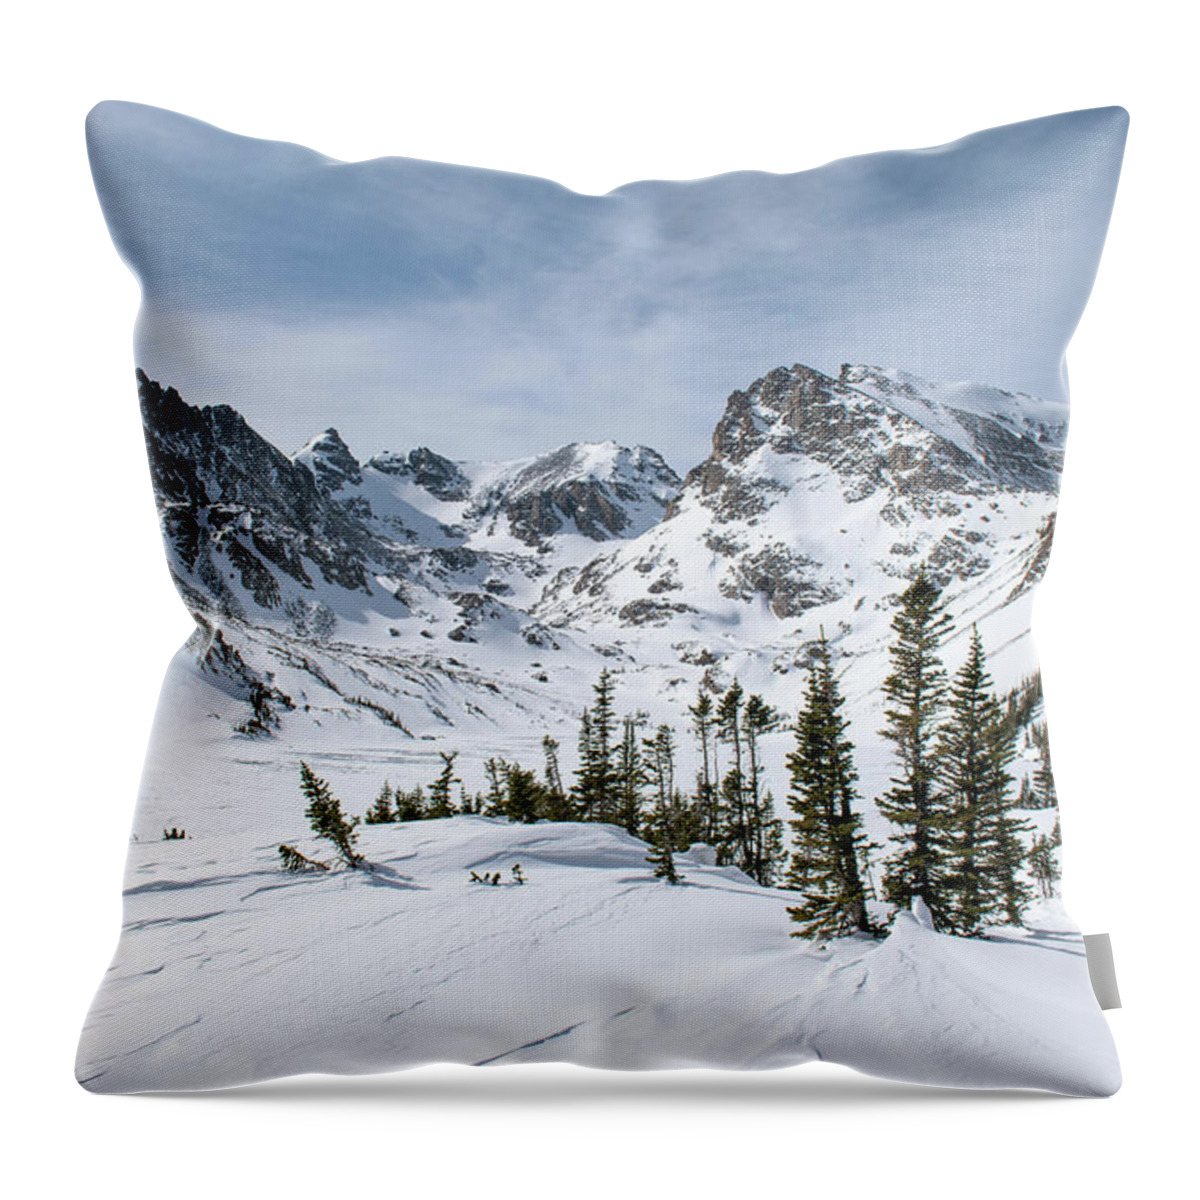 Colorado Throw Pillow featuring the photograph Lake Isabelle Winter by Aaron Spong